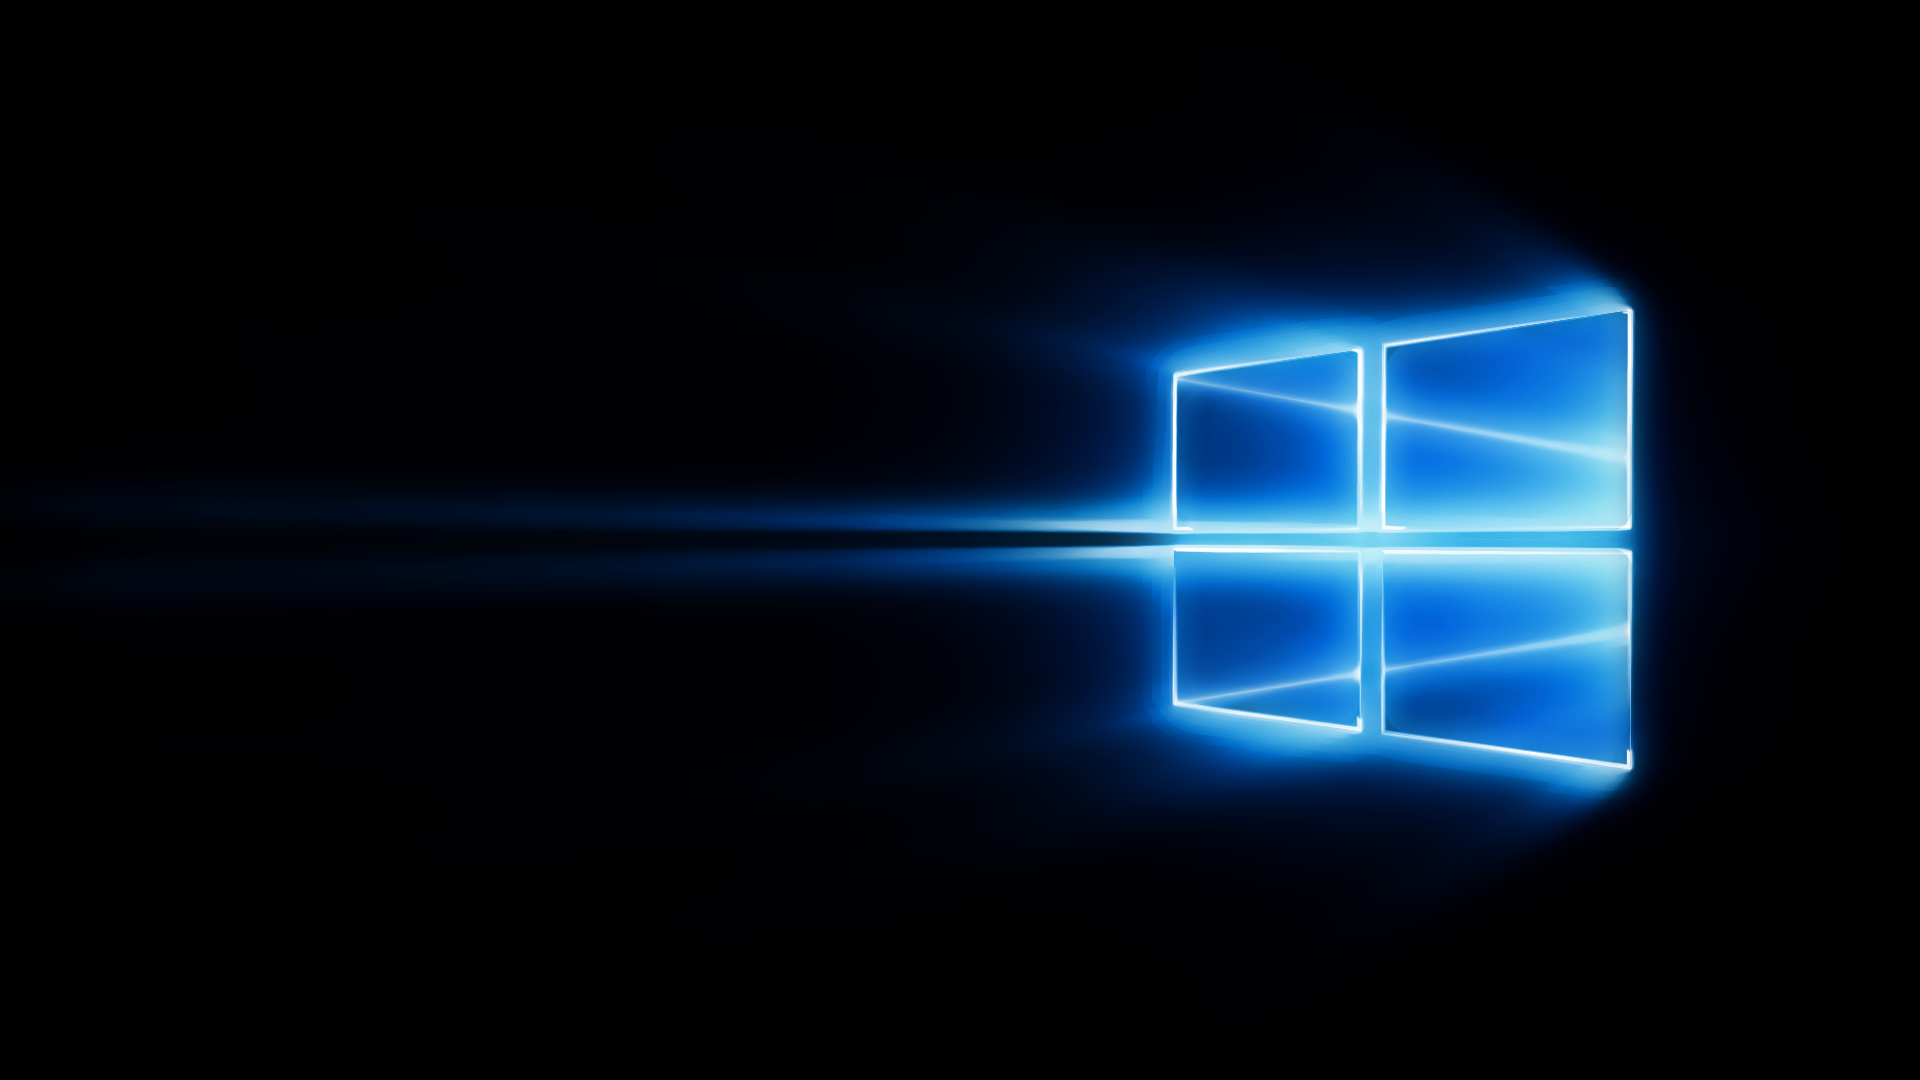 Windows 10 Wallpaper Themes HD 2861 - HD Wallpapers Site